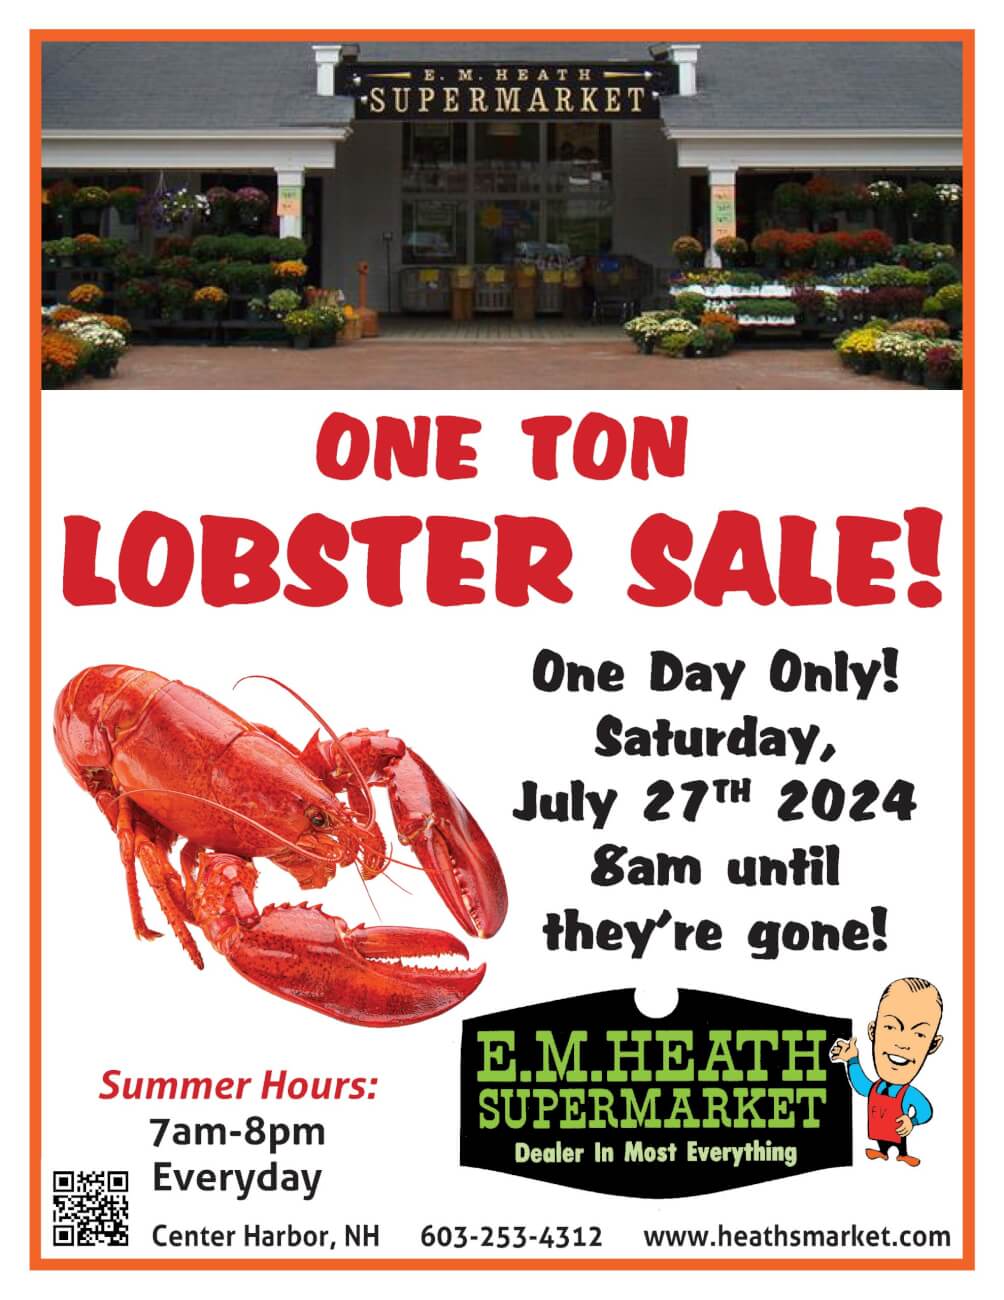 One Ton Lobster Sale